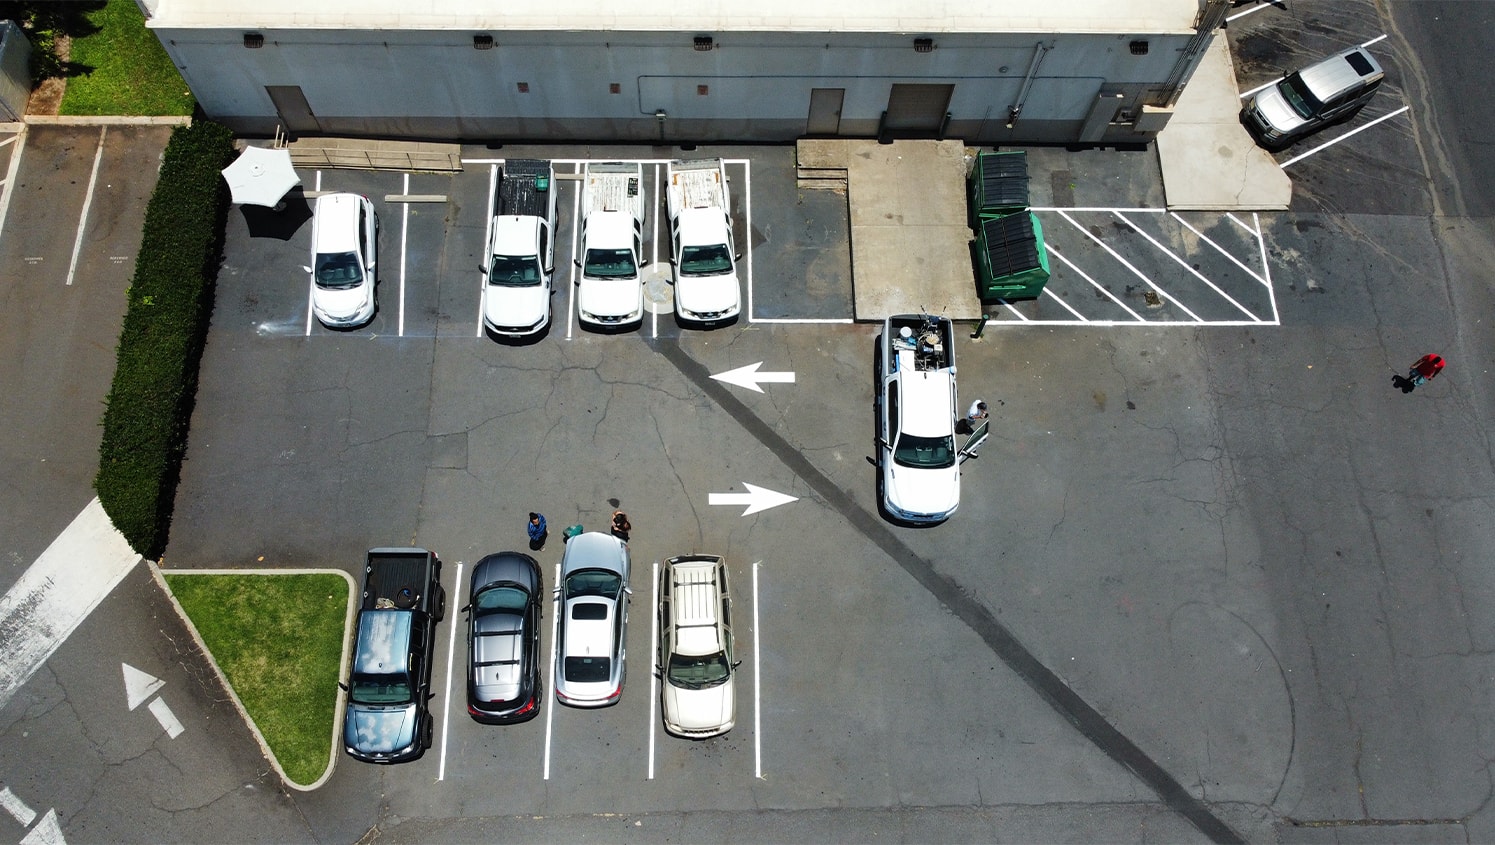 aerial view of O'Reilly Auto Parts parking lot with freshly painted line markings